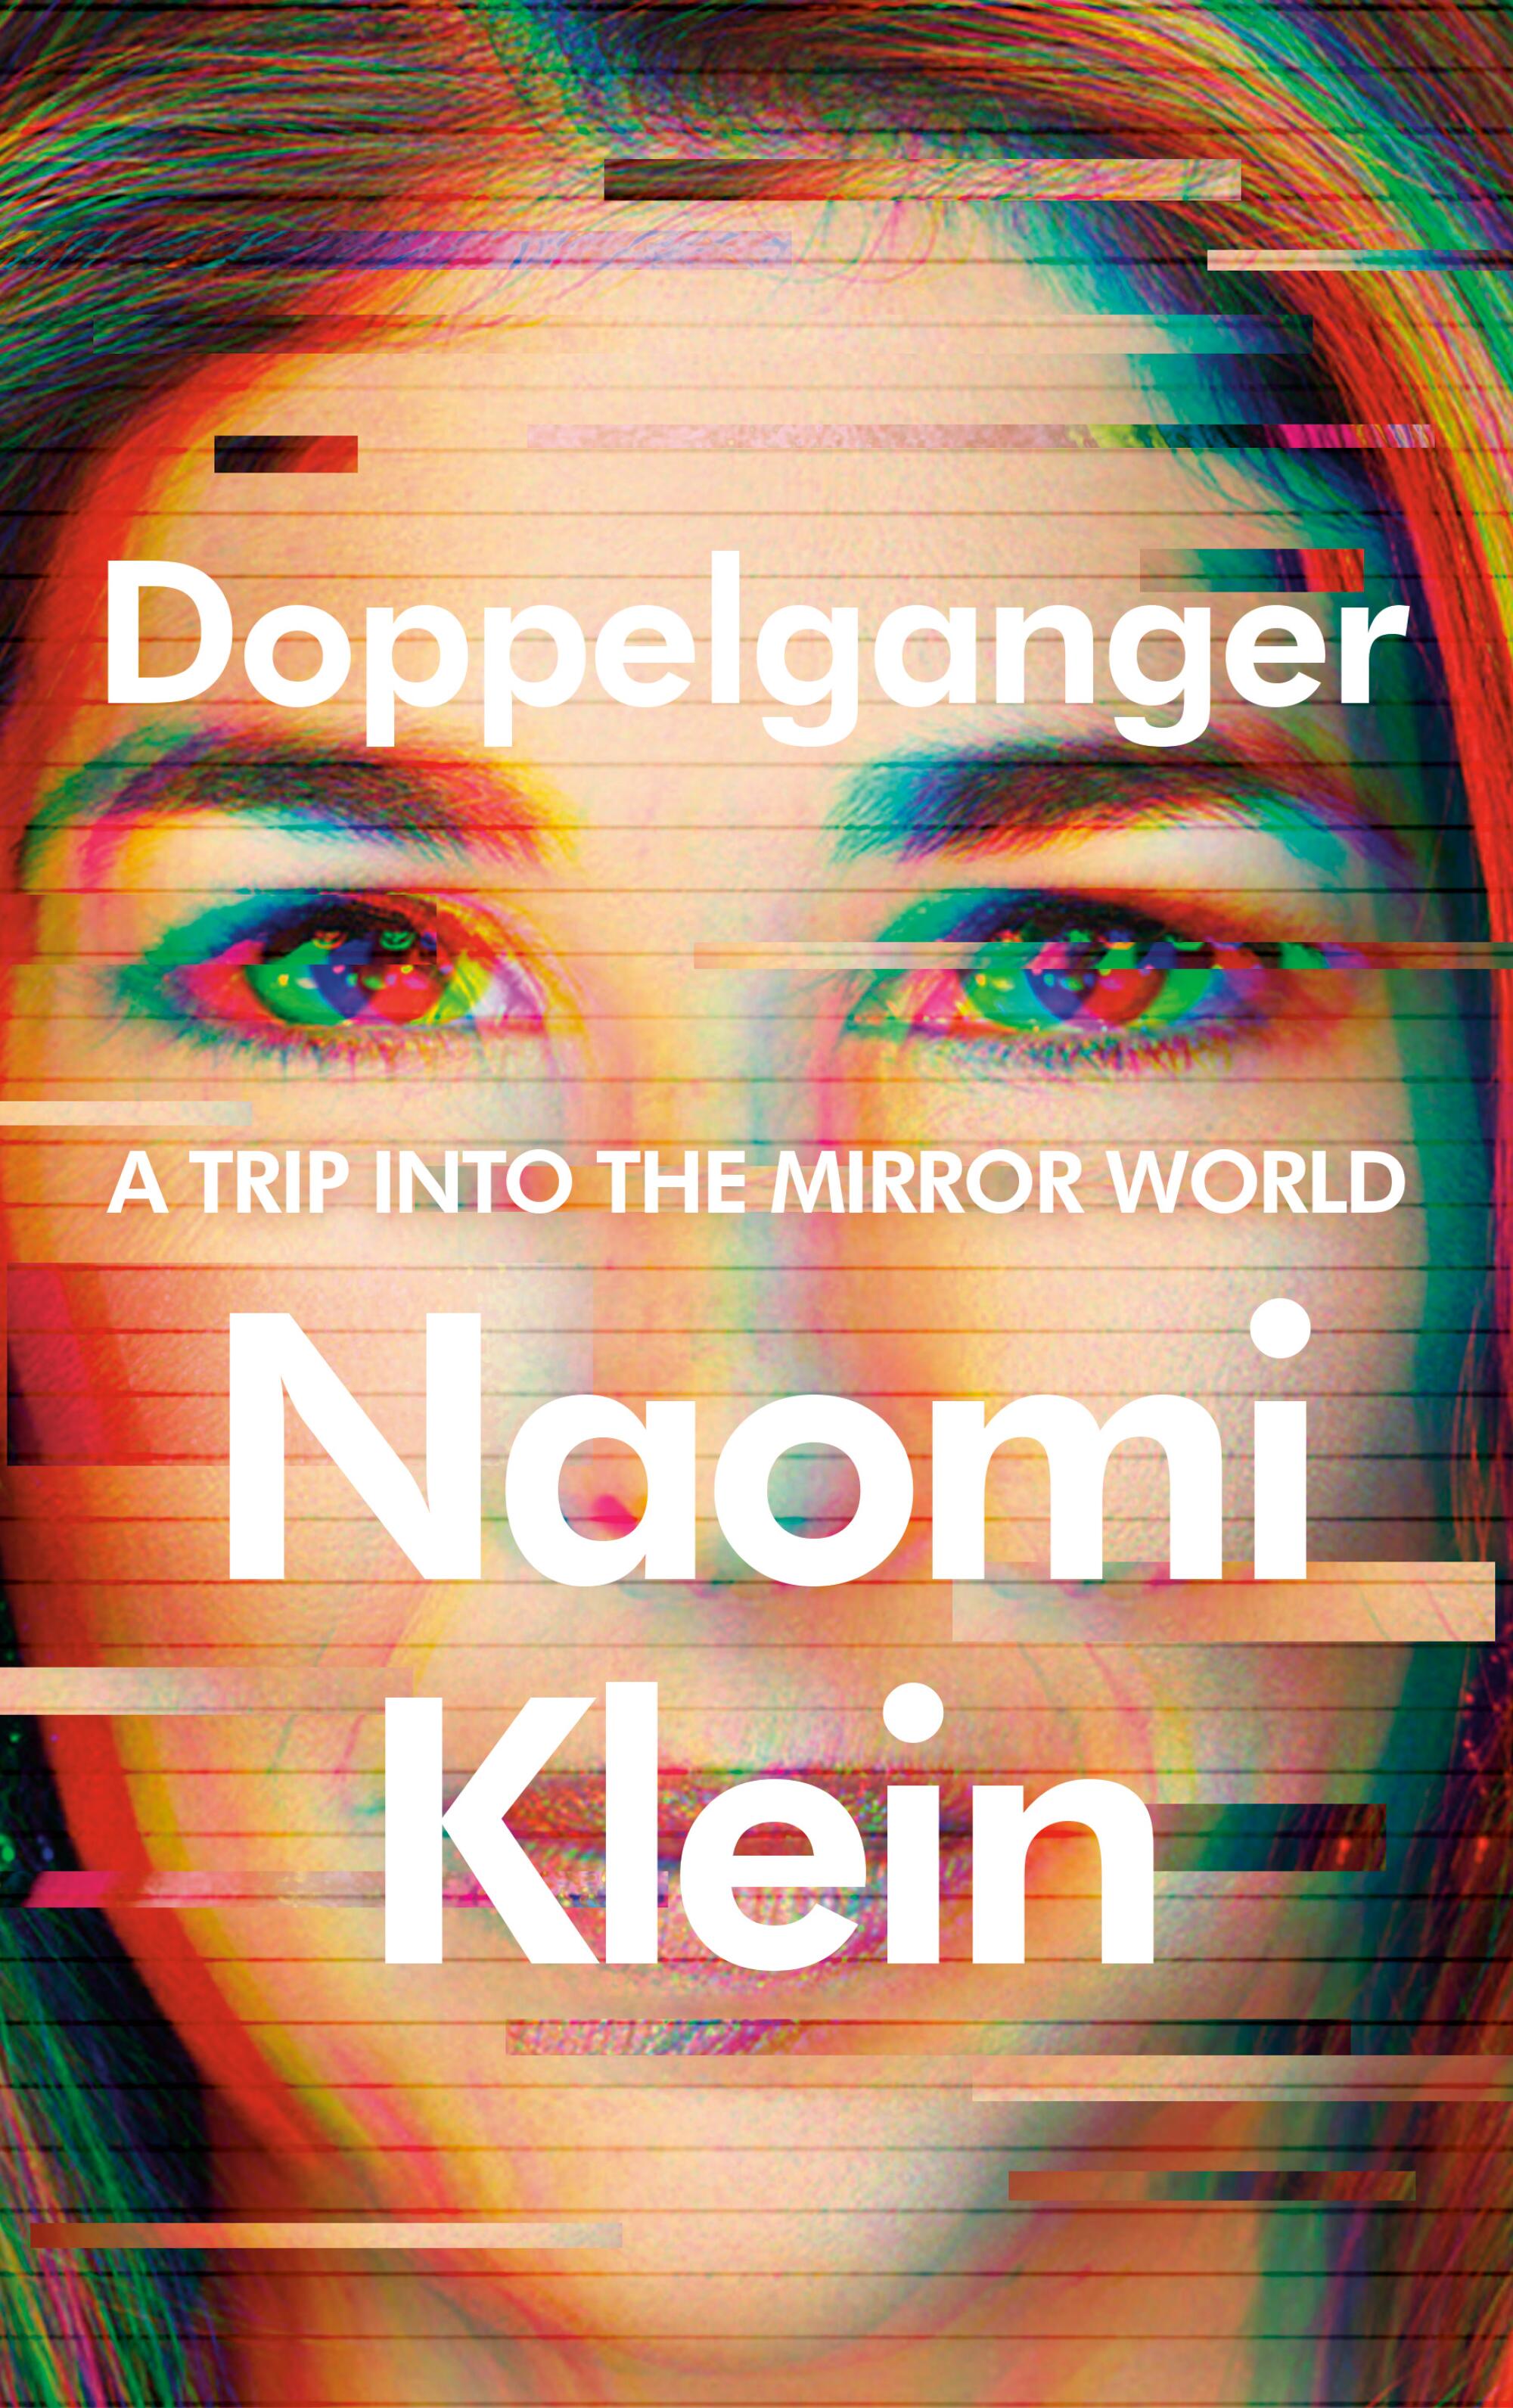 Book cover of "Doppelganger" by Naomi Klein